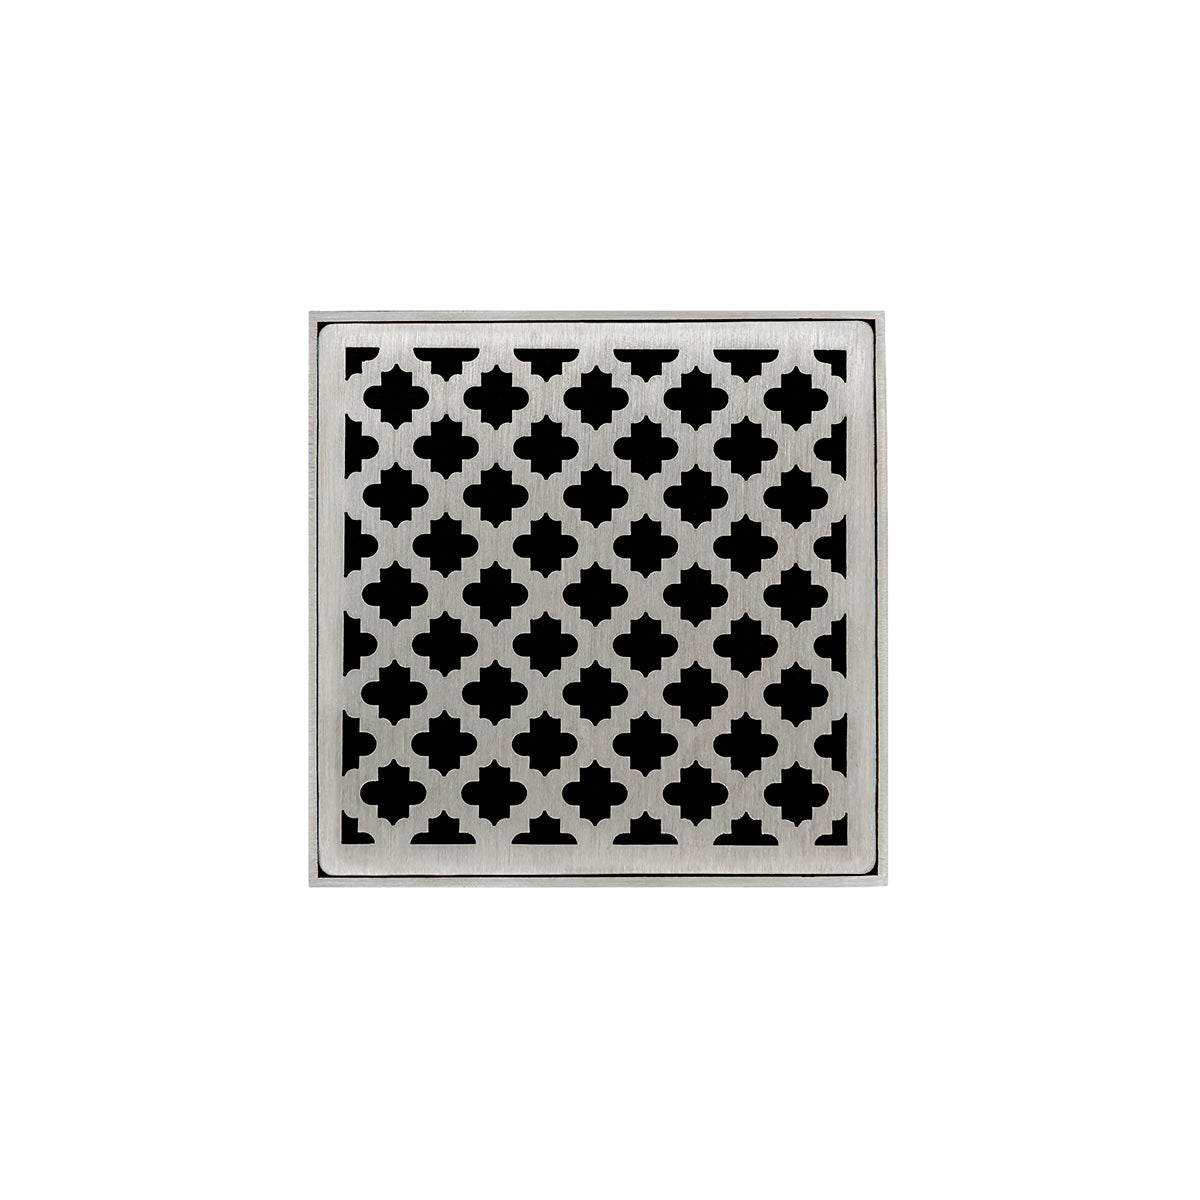 Infinity Drain 5" x 5" MD 5 High Flow Premium Center Drain Kit with Moor Pattern Decorative Plate with ABS Drain Body, 3" Outlet